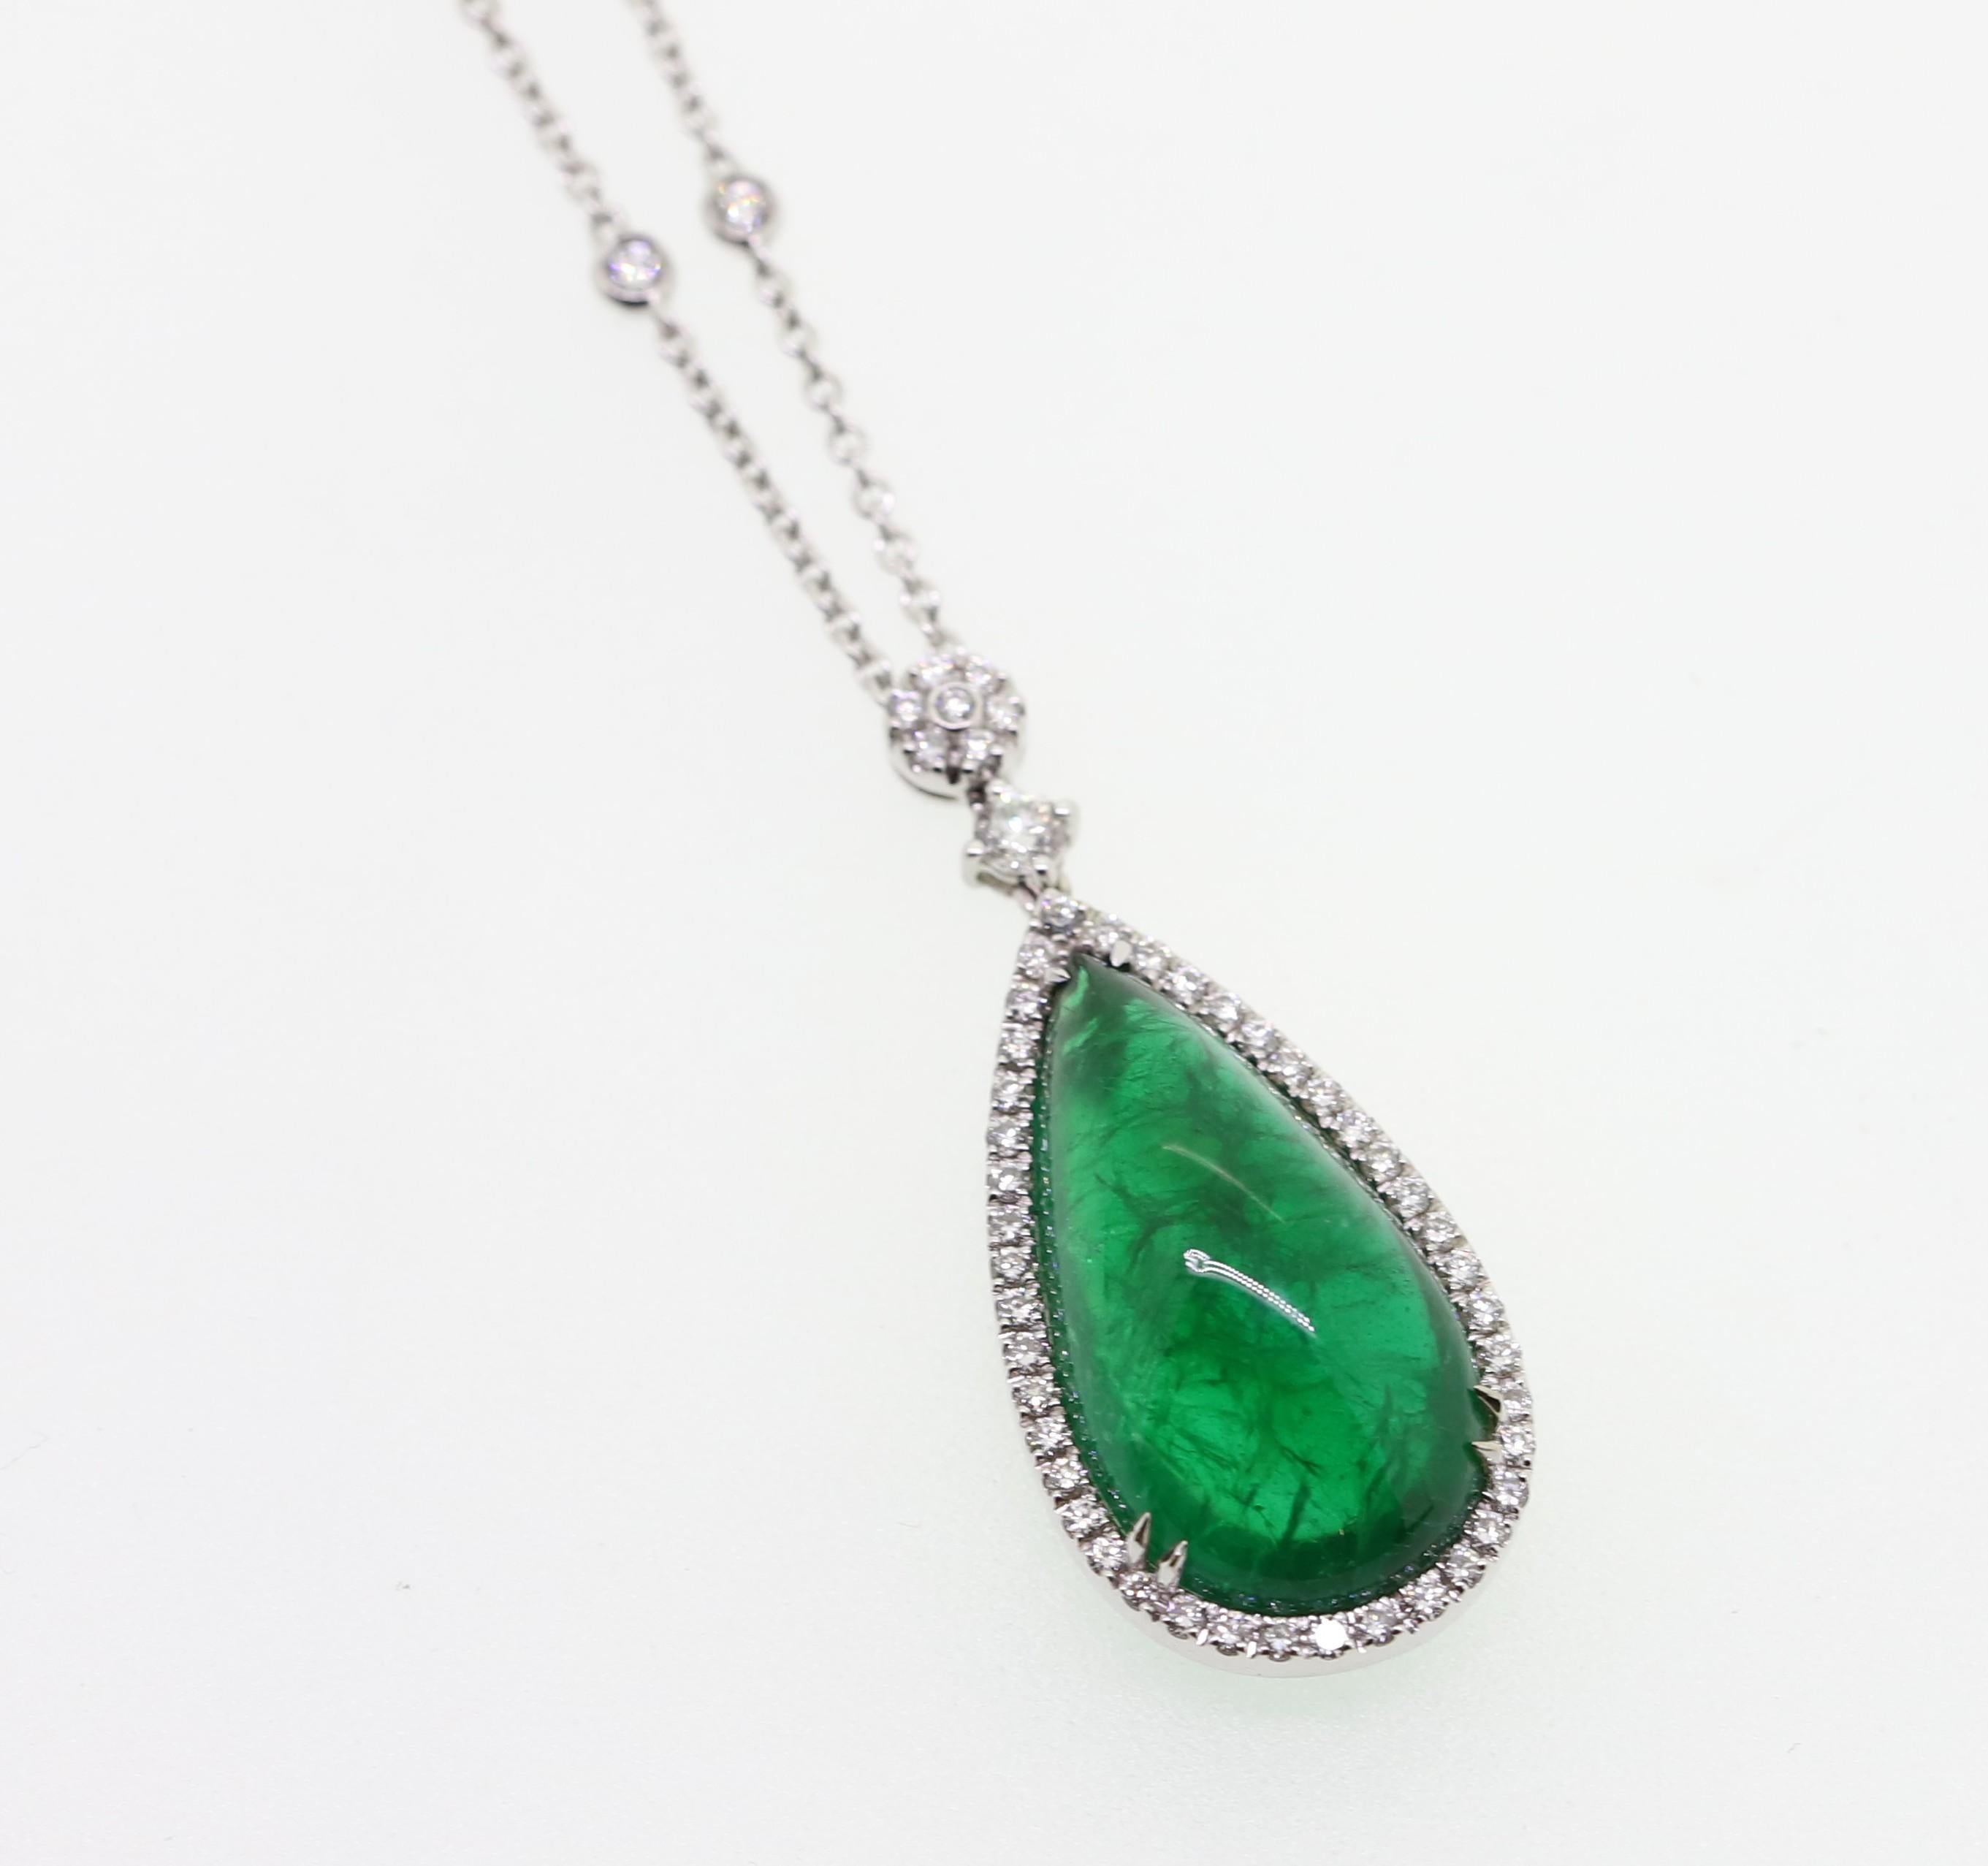 13.28 Carat Emerald Cabouchon with White Diamonds Pendant Necklace For Sale 1